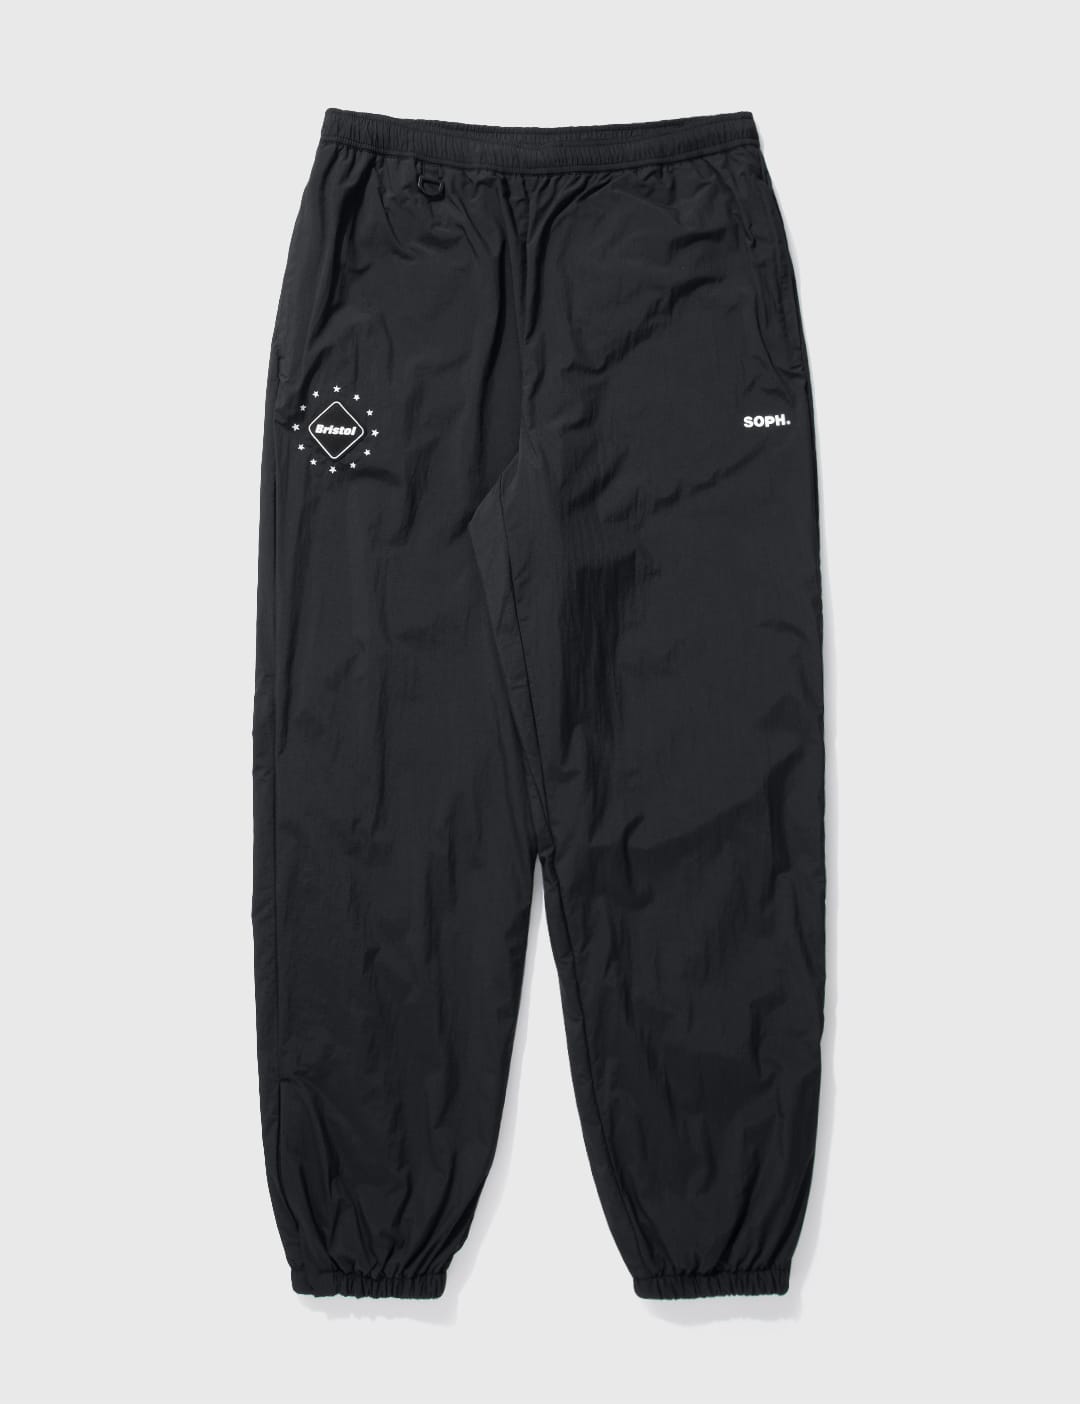 F.C. Real Bristol - Insulation Easy Long Pants | HBX - Globally